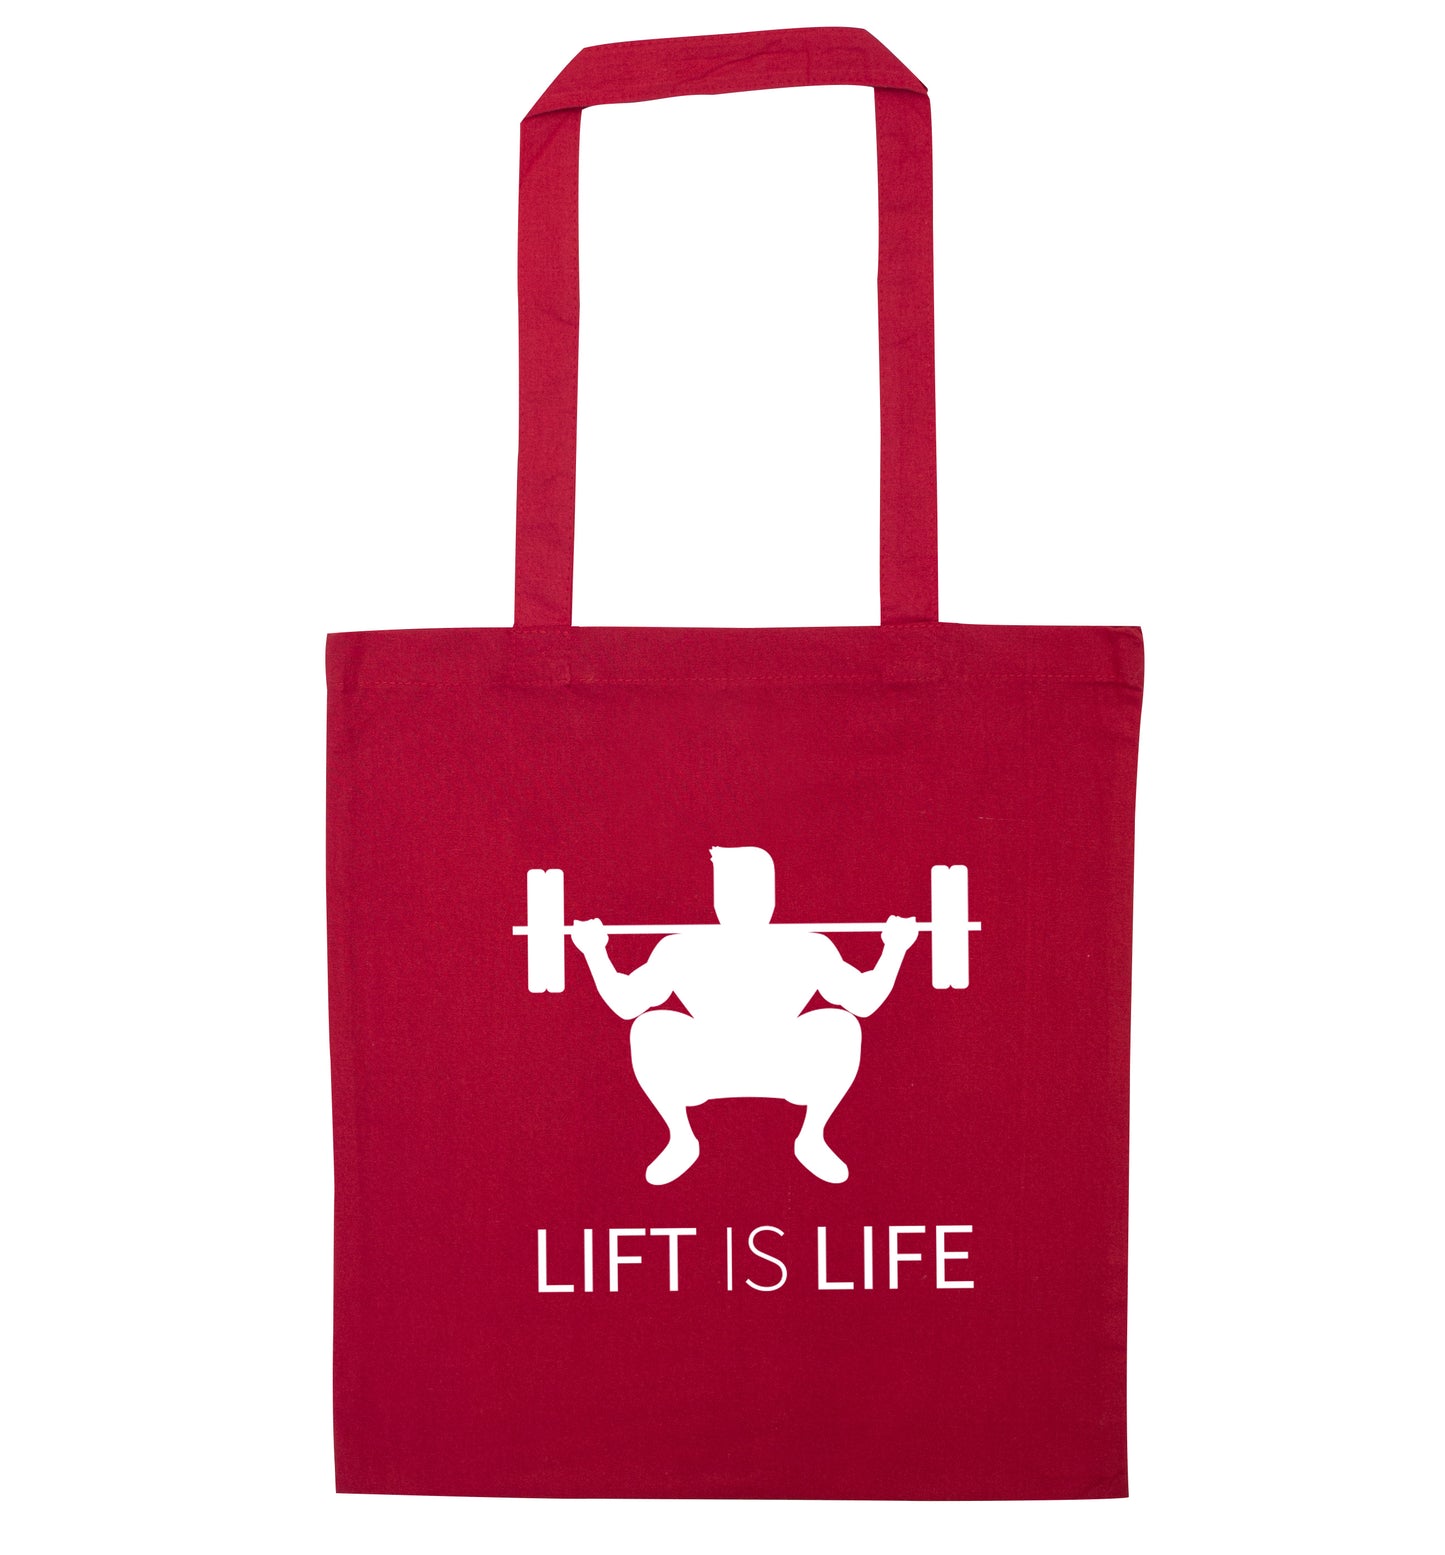 Lift is life red tote bag